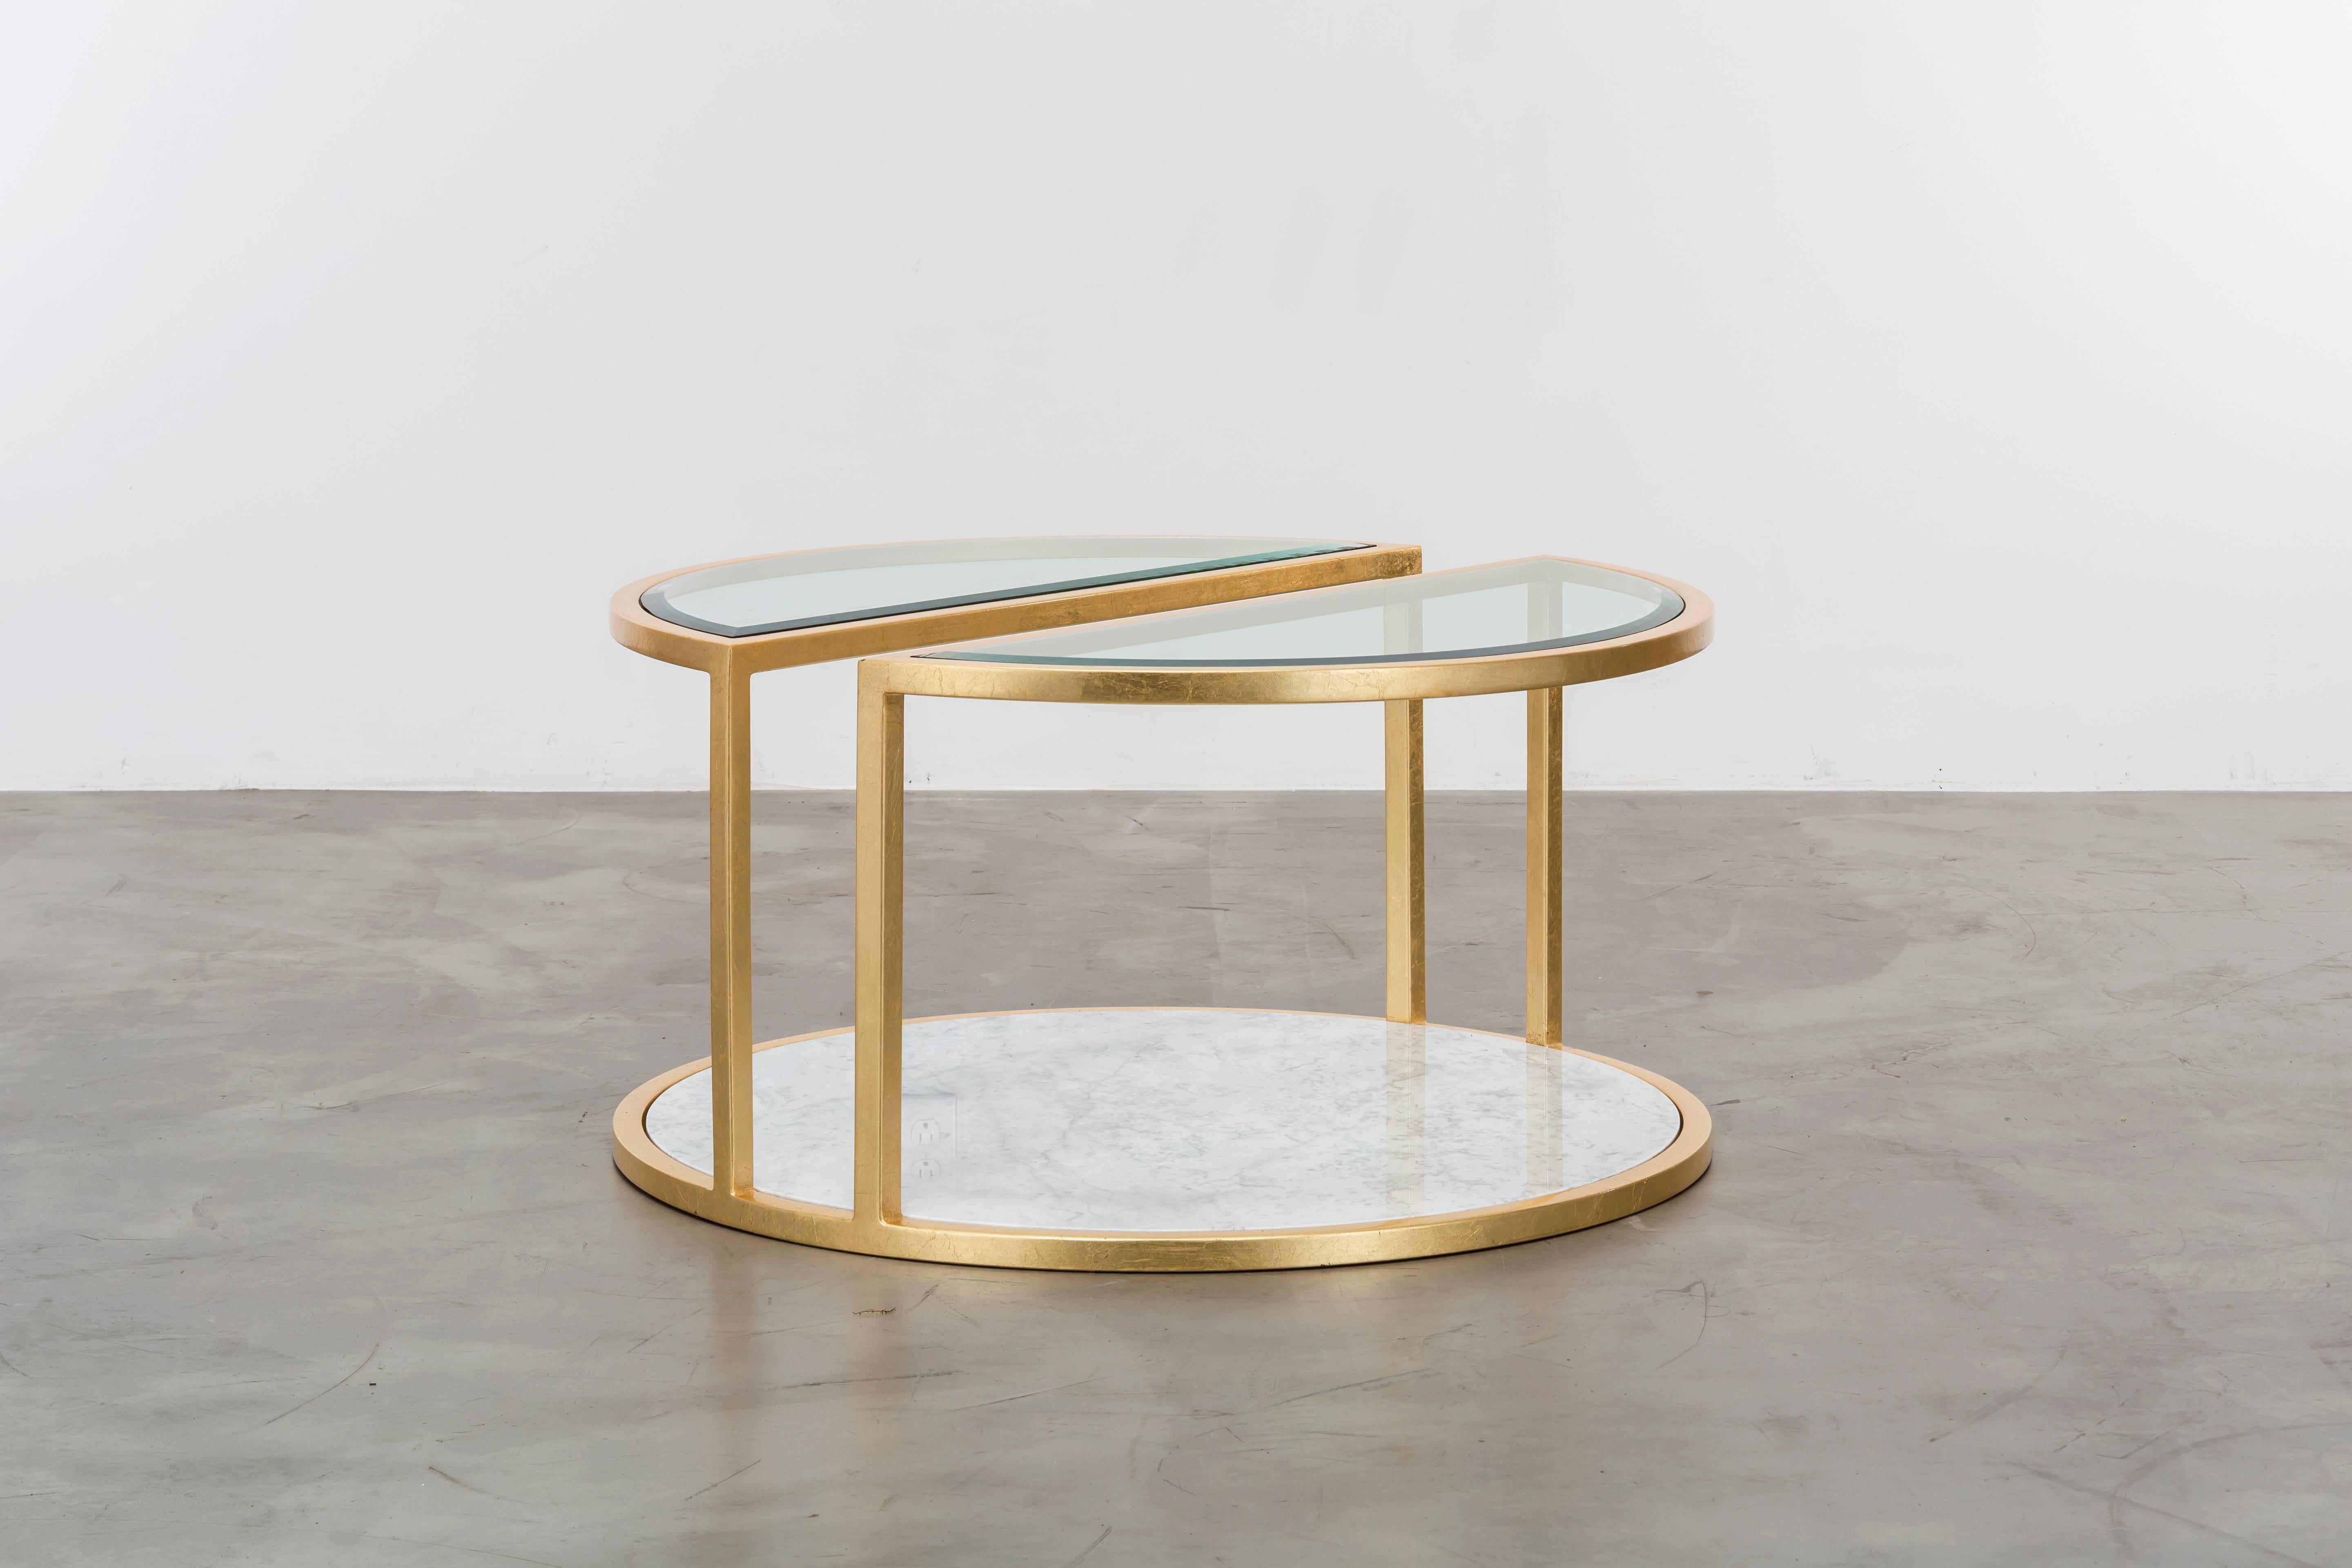 The Kais coffee table is a modern round gold leaf cocktail table made of gold leaf over iron with Carrara marble and bevelled edge glass. Fully custom and made to order in California.